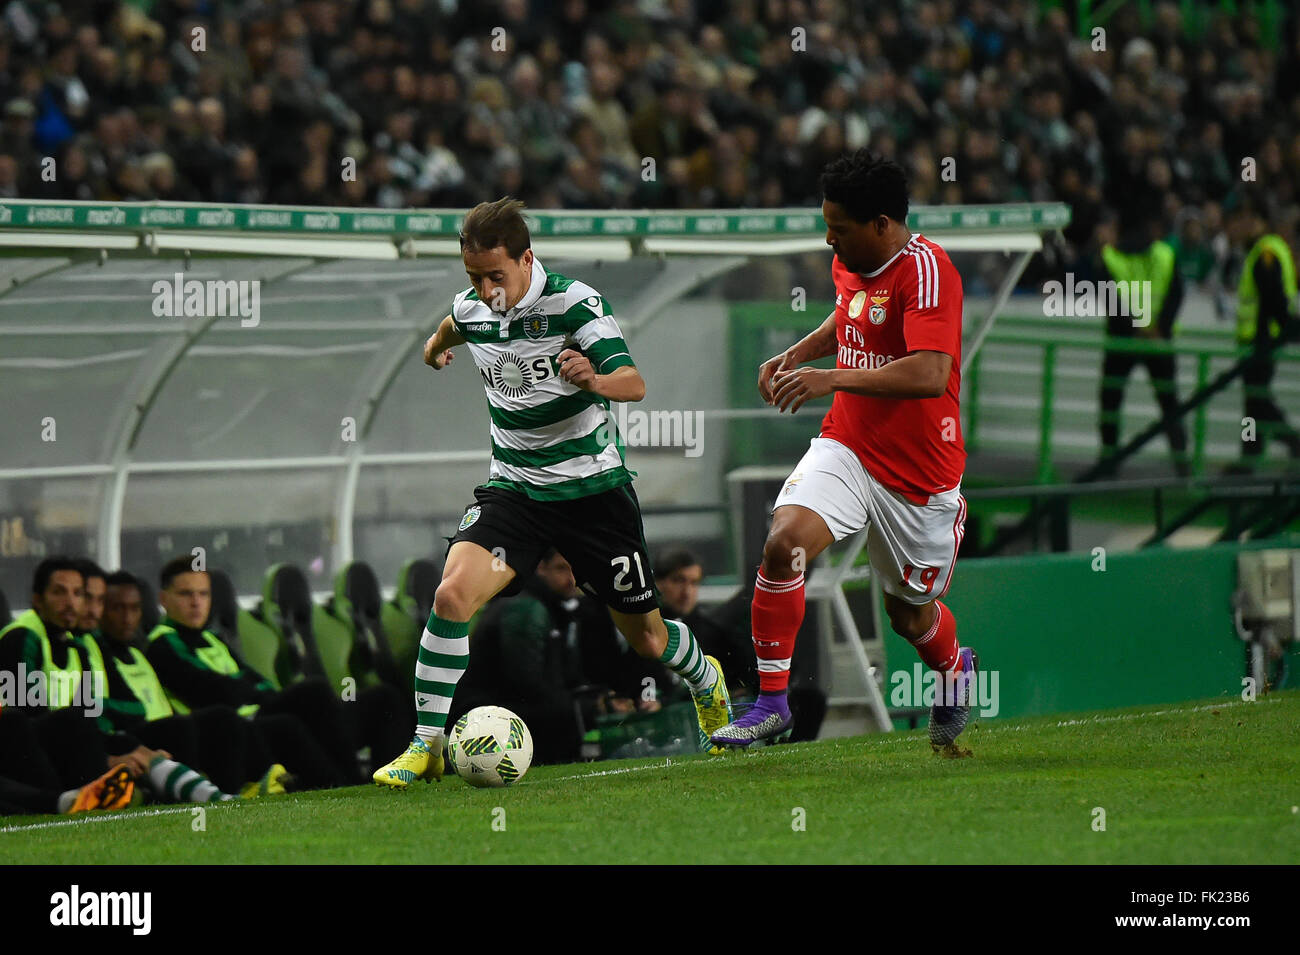 Lisbon, Portugal. 5th March, 2016.  SPORTING-BENFICA - João Pereira (L), Sporting player, and Eliseu (R), Benfica player, in action during Portuguese League football match between Sporting and Benfica held in Estádio Alvalade XXI, in Lisbon,  Portugal. Photo: Bruno de Carvalho/Alamy Live News Stock Photo